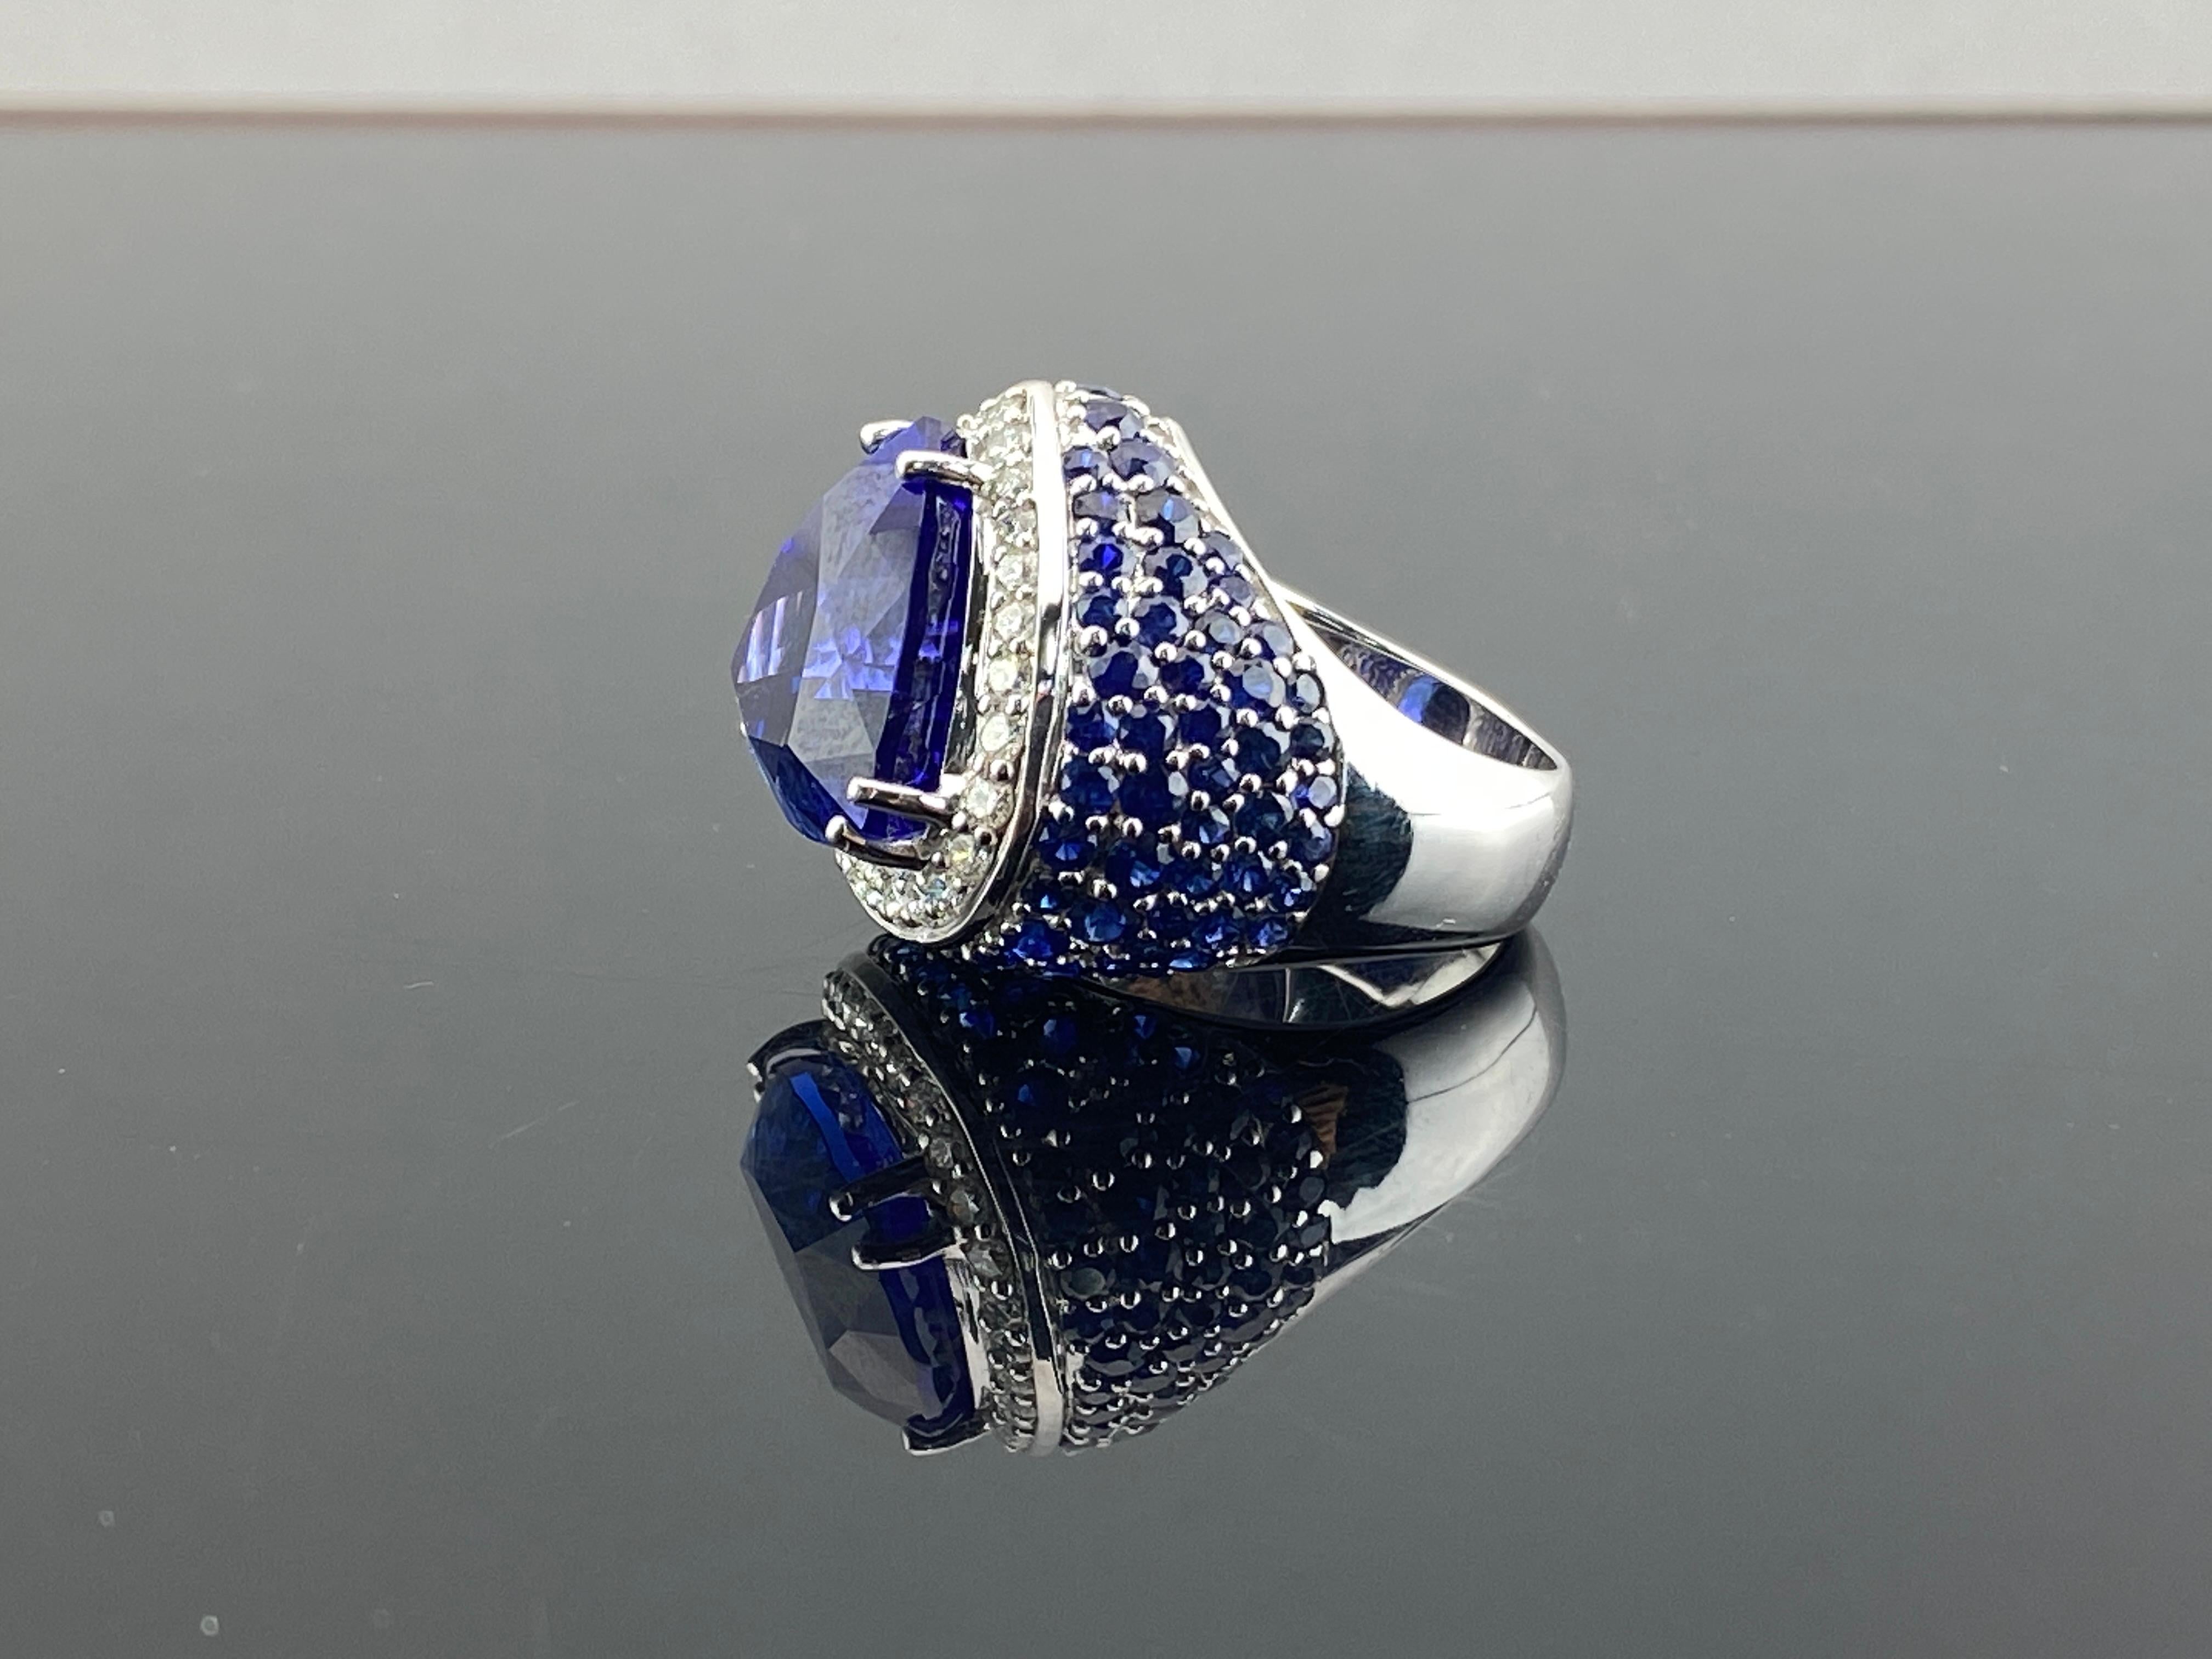 A beautiful statement ring, with a 20.6 carat vivid blue, transparent Tanzanite center stone - surrounded by 0.88 carats White Diamond and 4.95 carats Blue Sapphire all set in 18K White Gold.

We will be happy to answer any questions about this